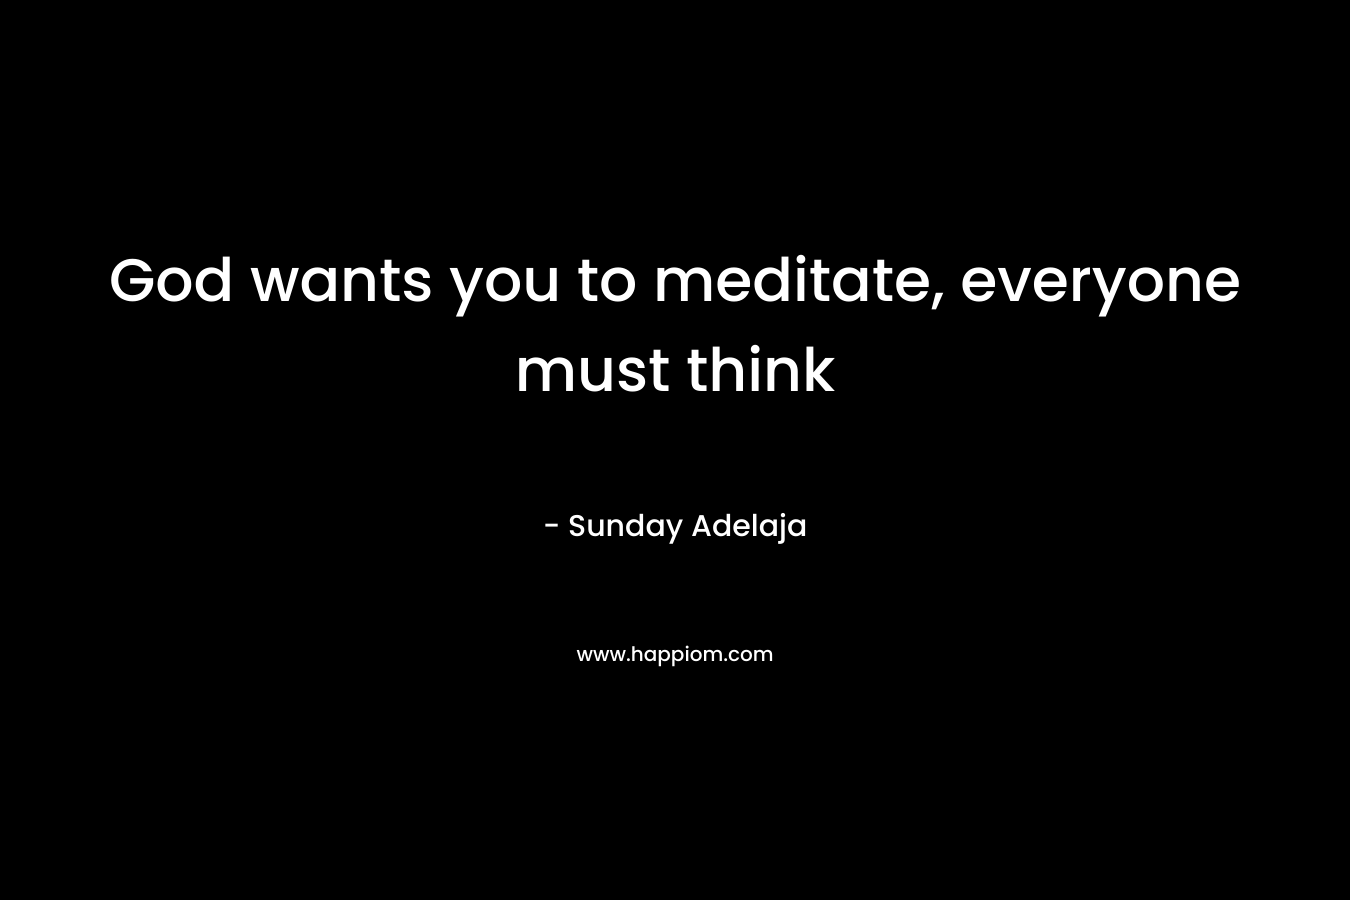 God wants you to meditate, everyone must think